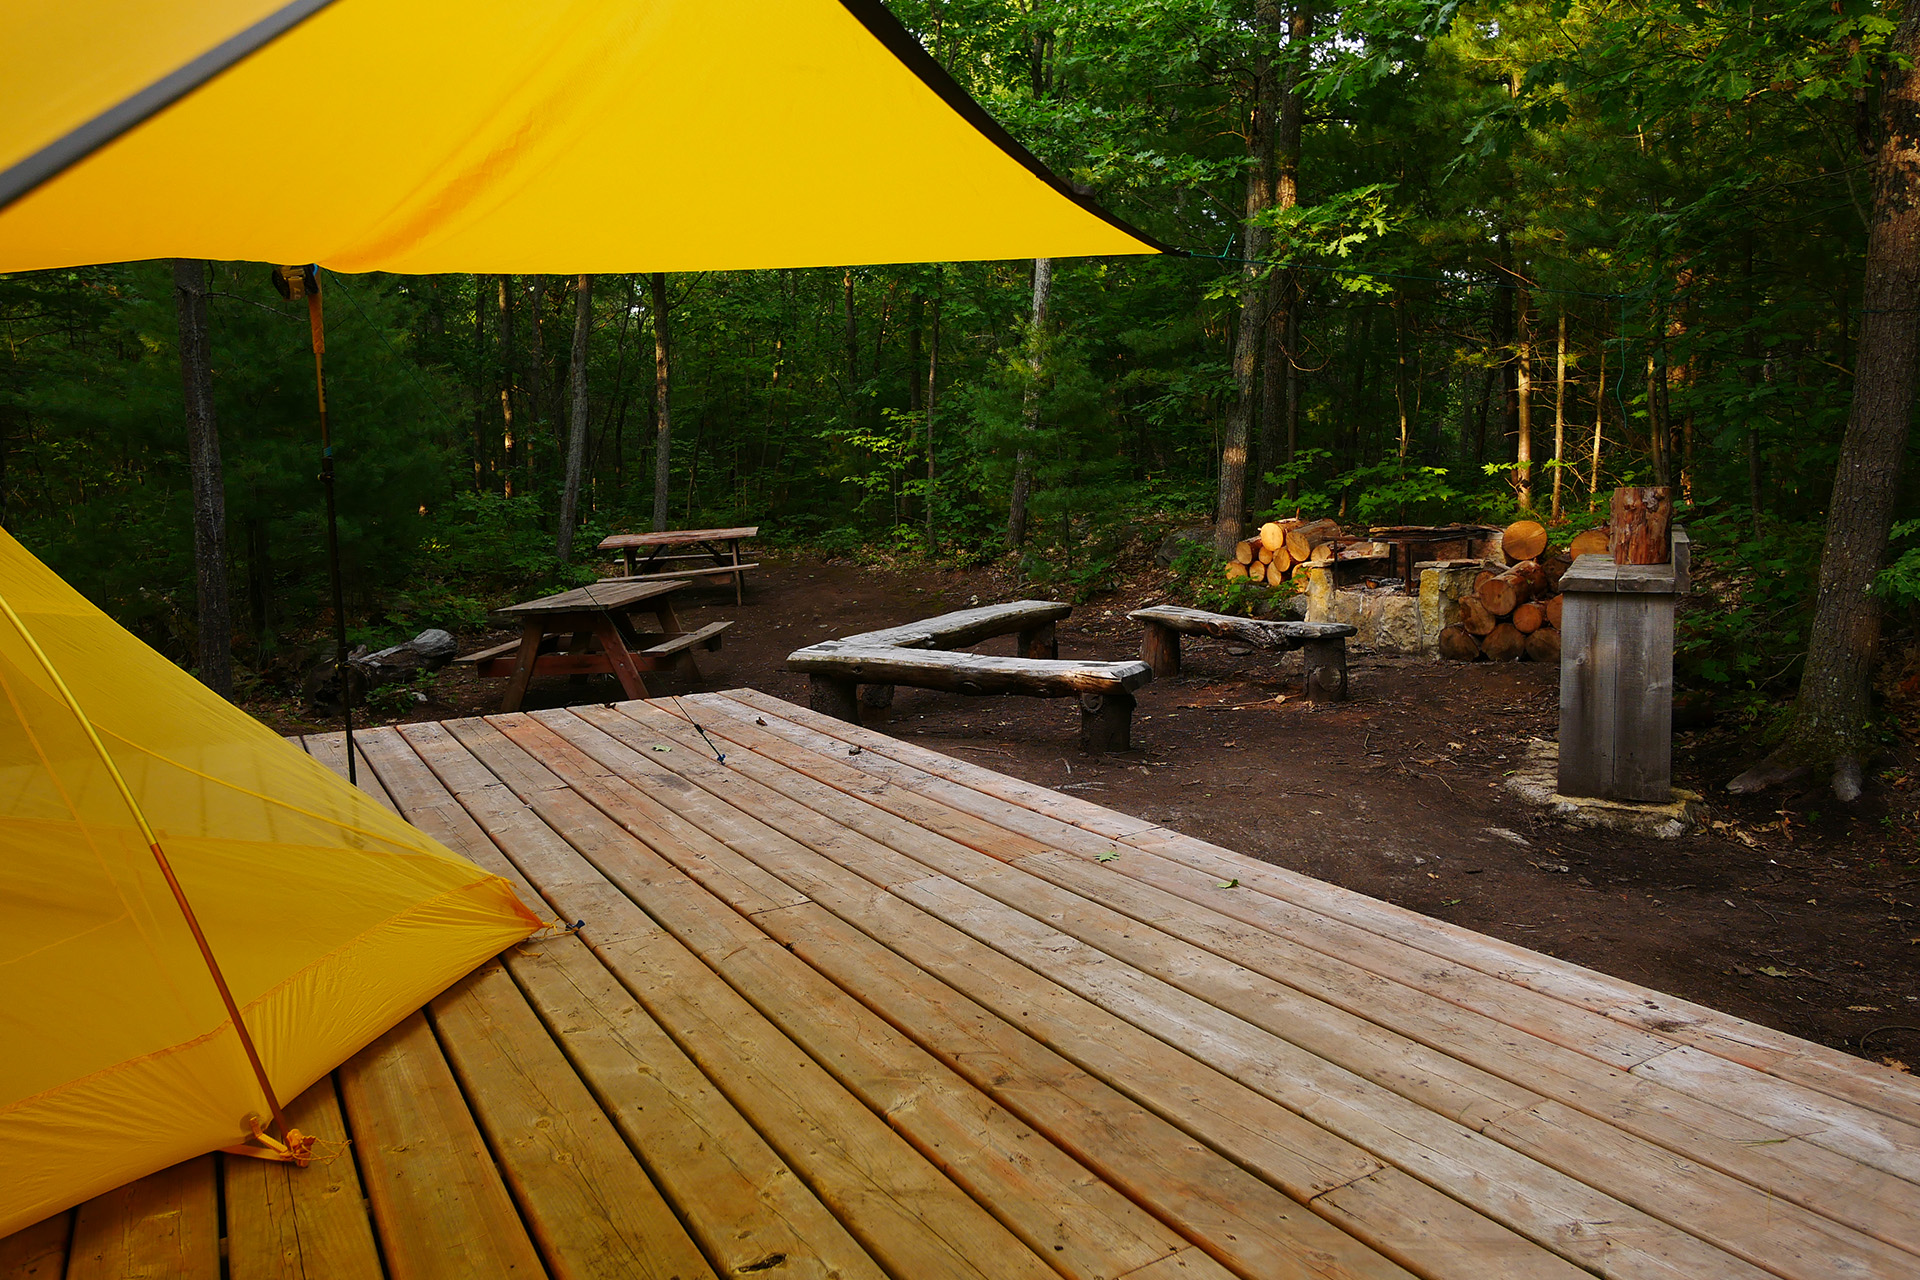 Tent and deck at Point Grondine Park